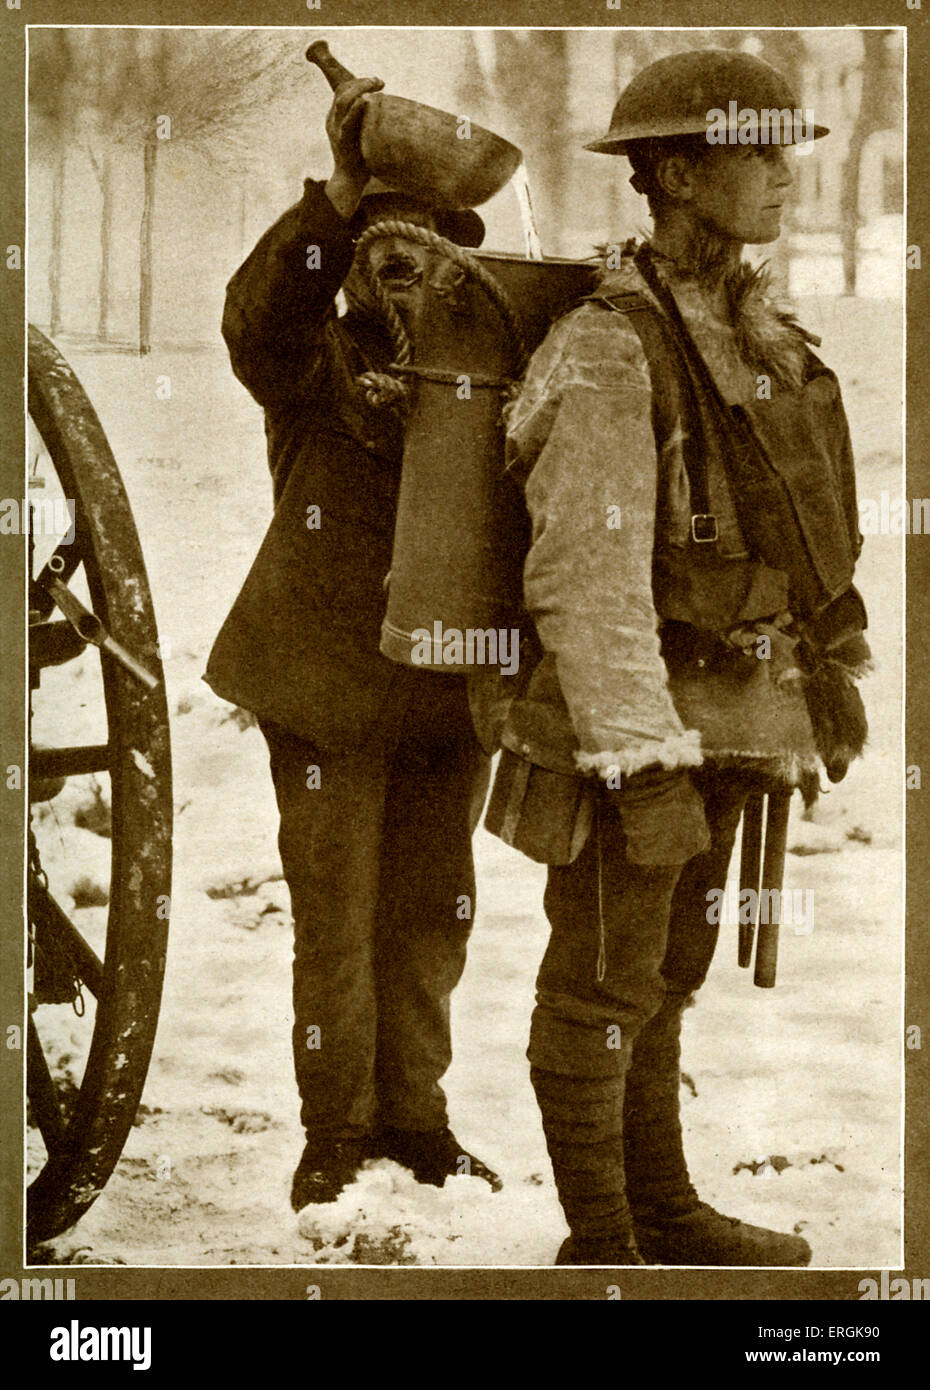 World War I - British soldier from infantry supply unit in winter snow, with a soup container strapped to his back to supply Stock Photo